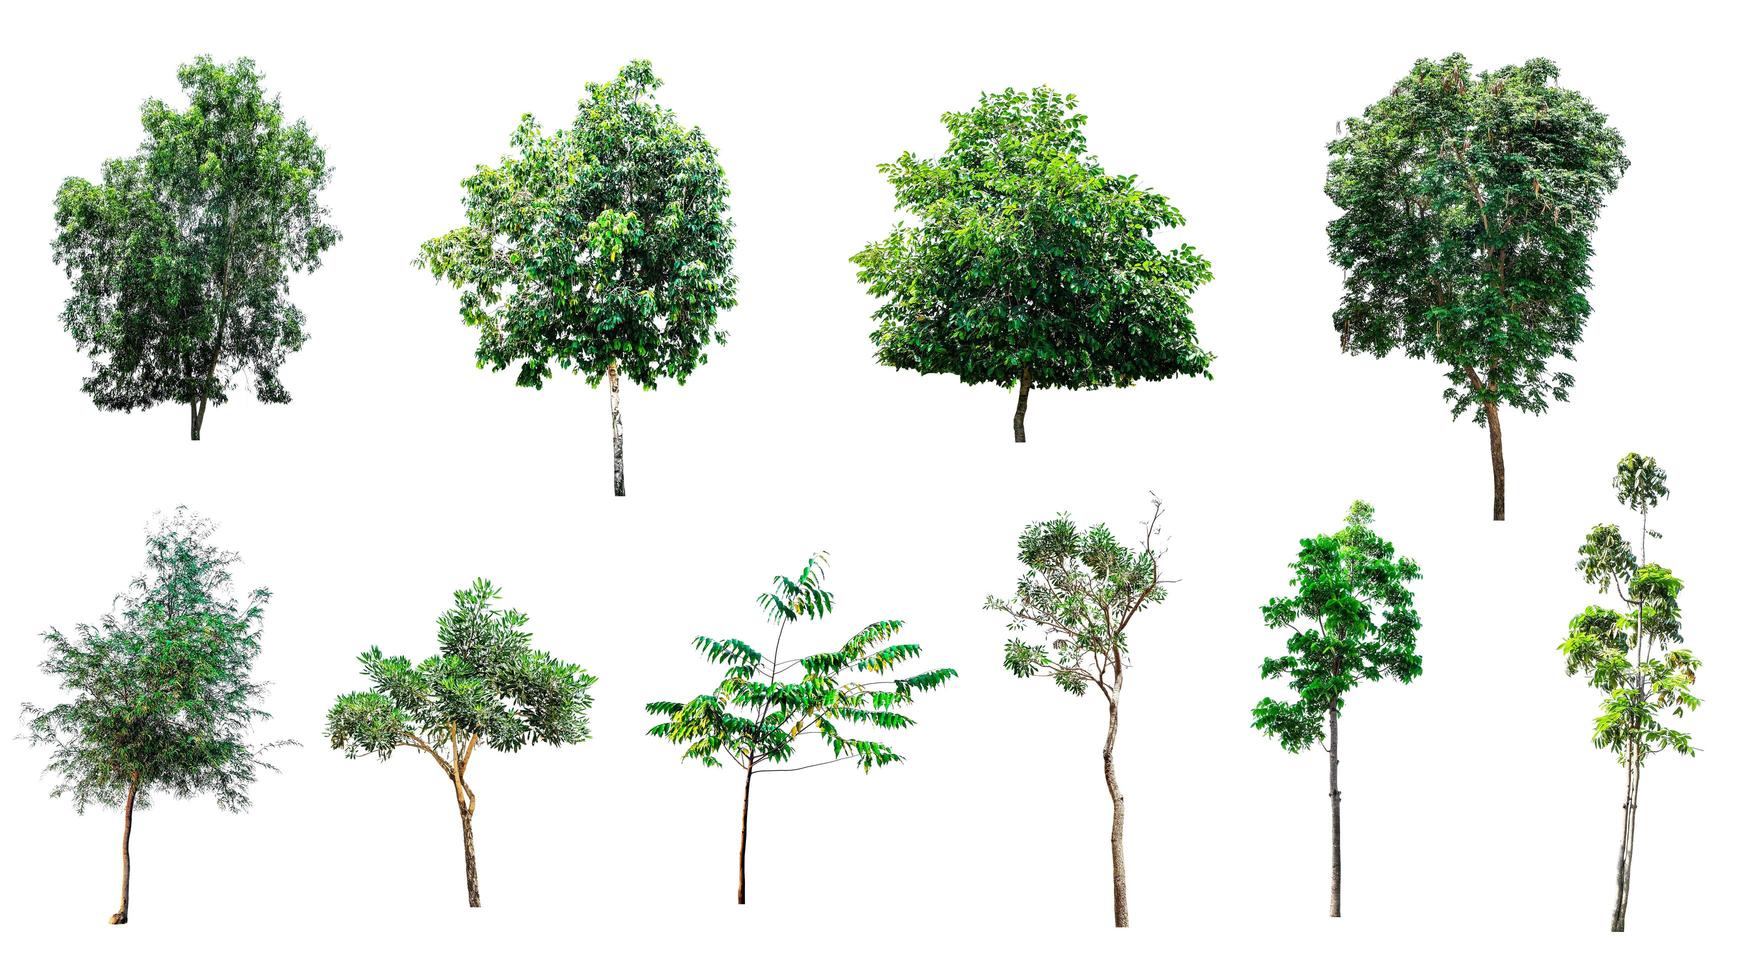 set or group of big fresh green tree isolated on white background, conservative or preservative forest concept photo